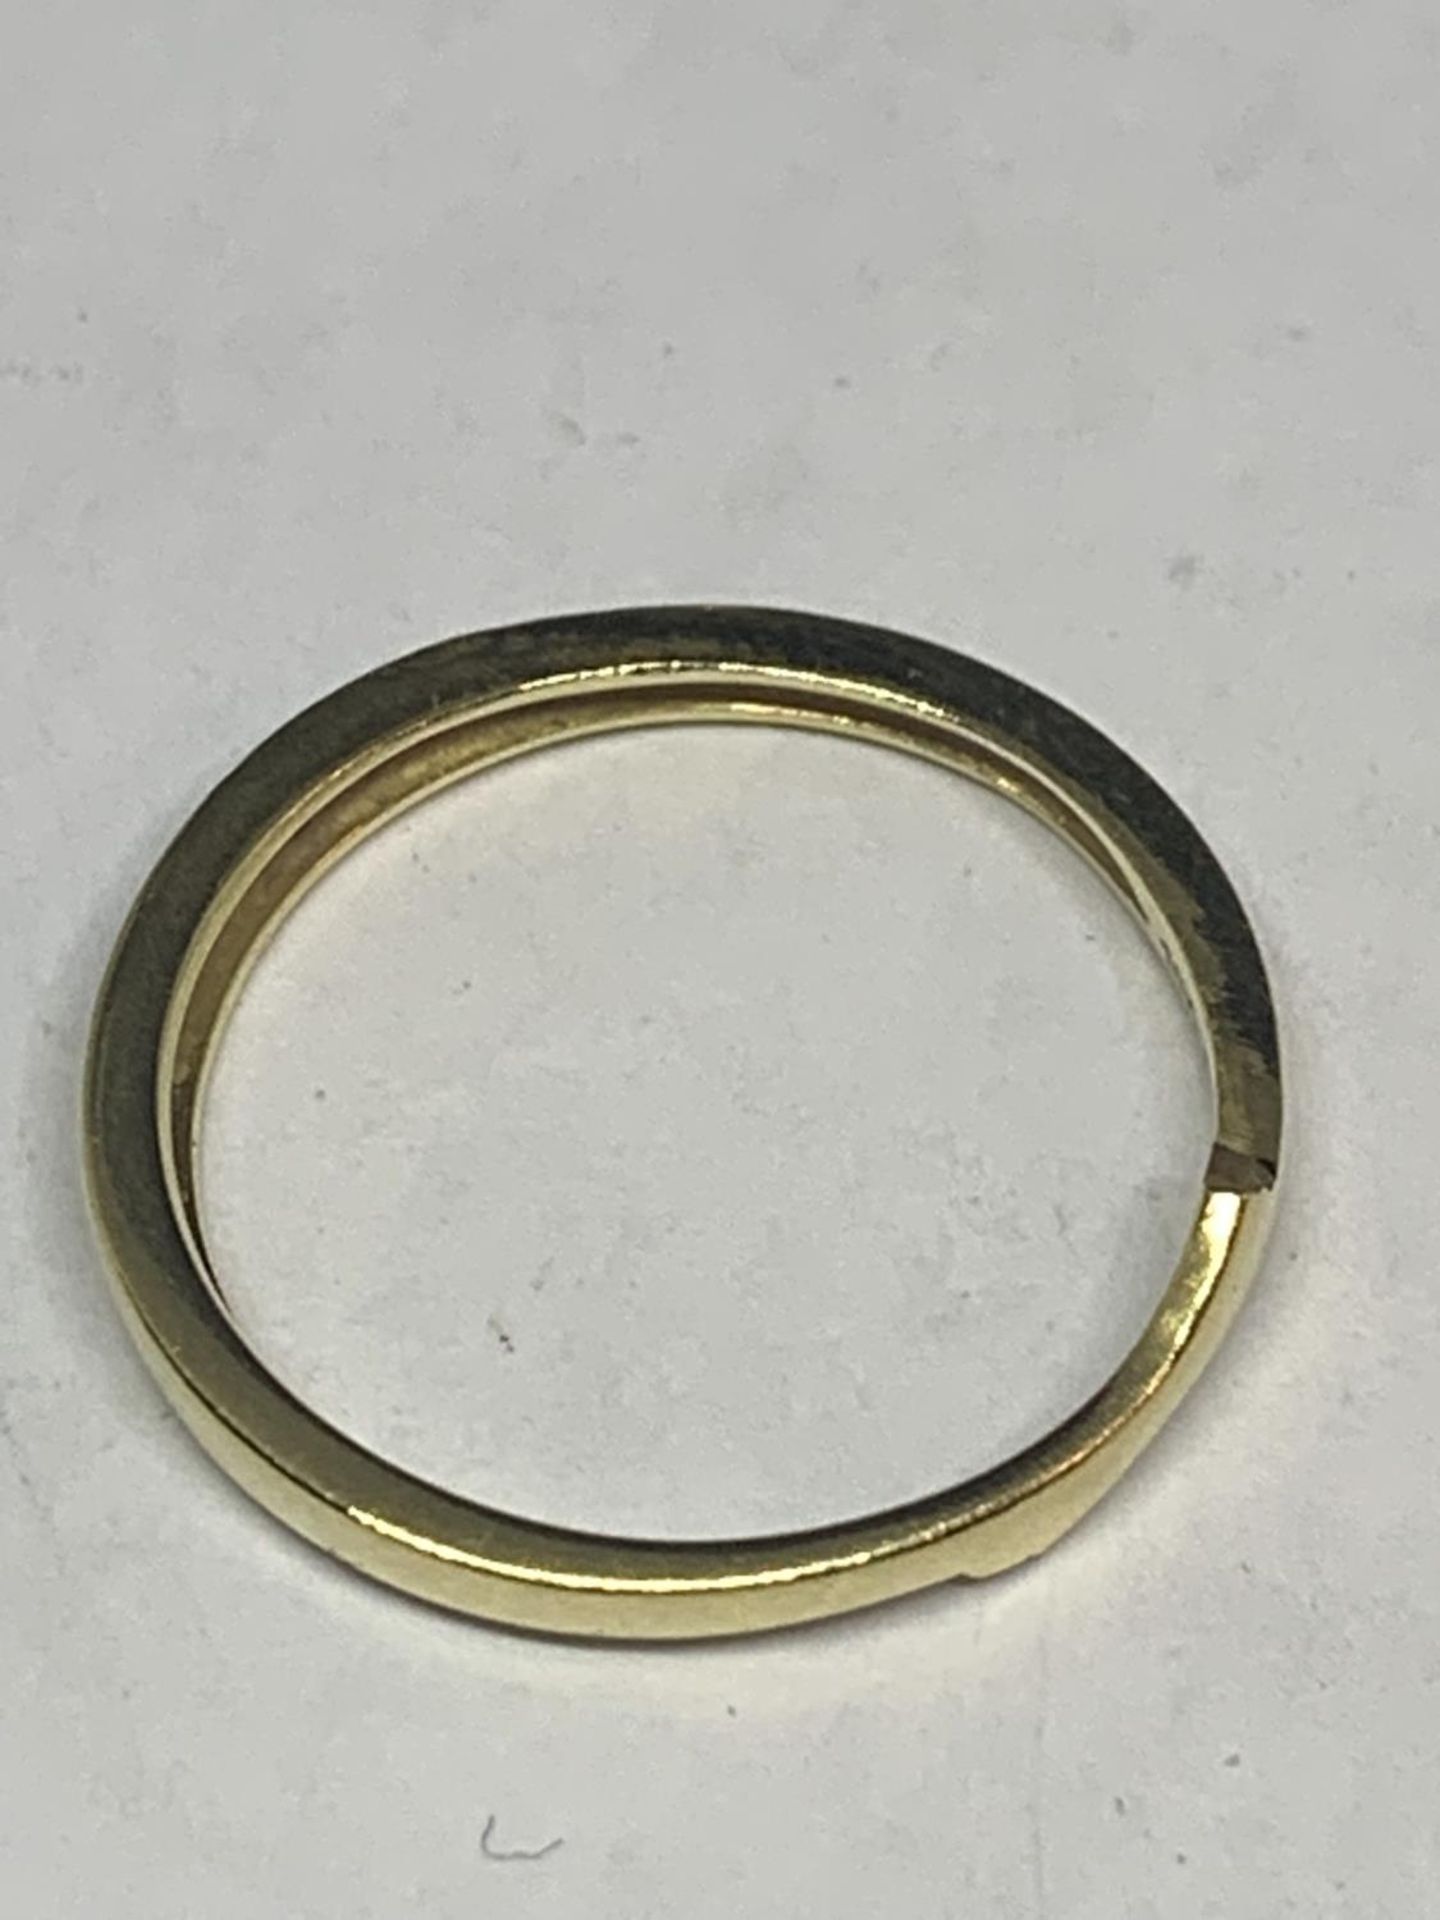 AN 18 CARAT GOLD RING WEIGHT 2.9G - Image 2 of 3